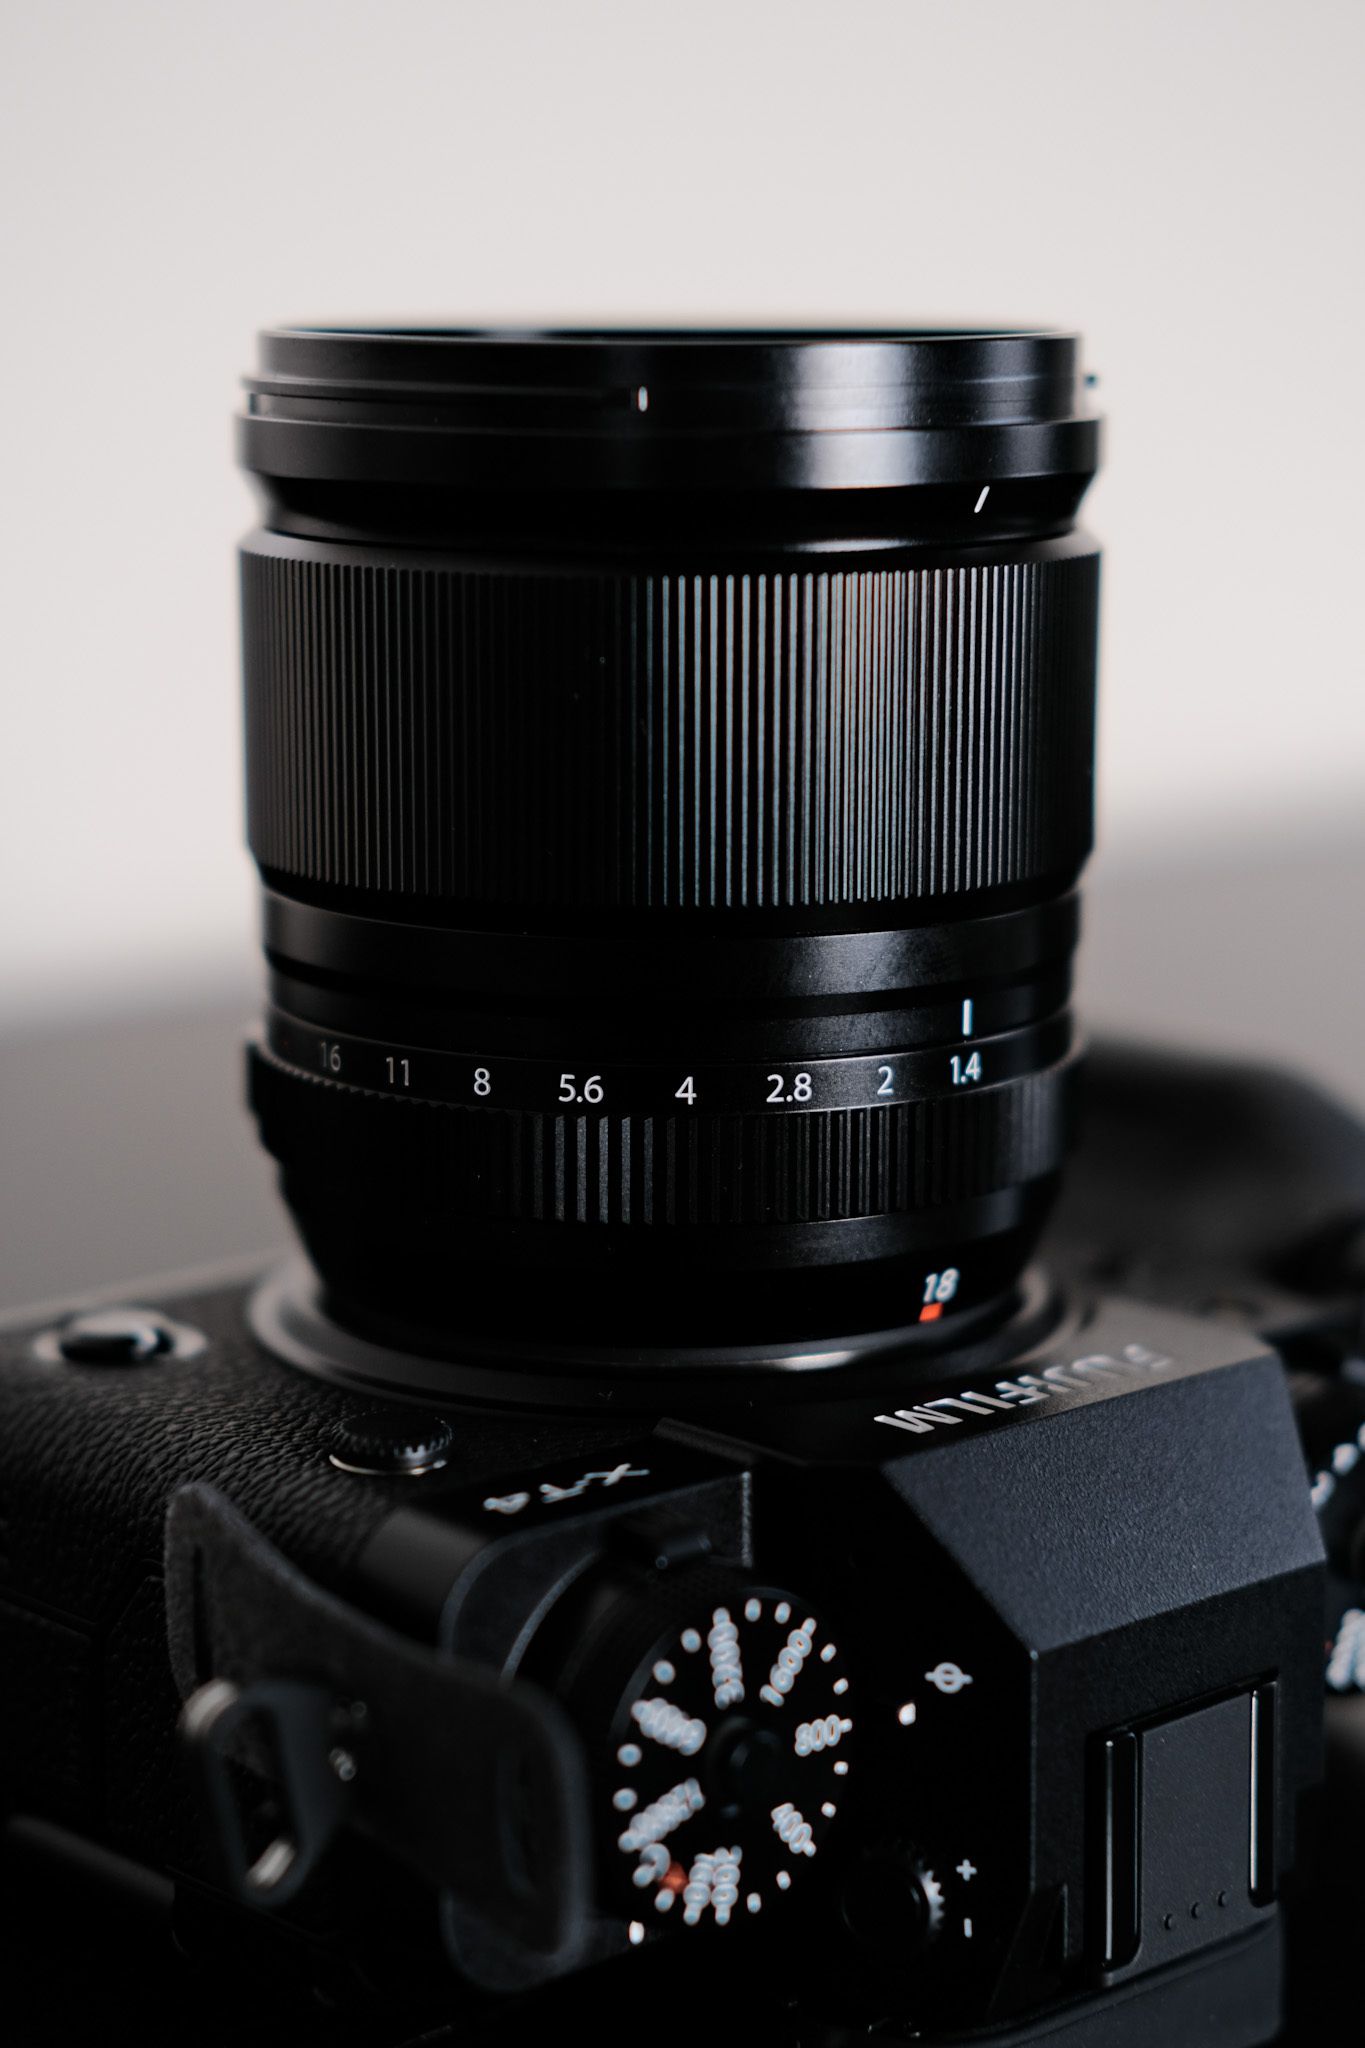 The Fujifilm XF 18mmF1.4 R LM WR Lens Hands-On Review | Moment